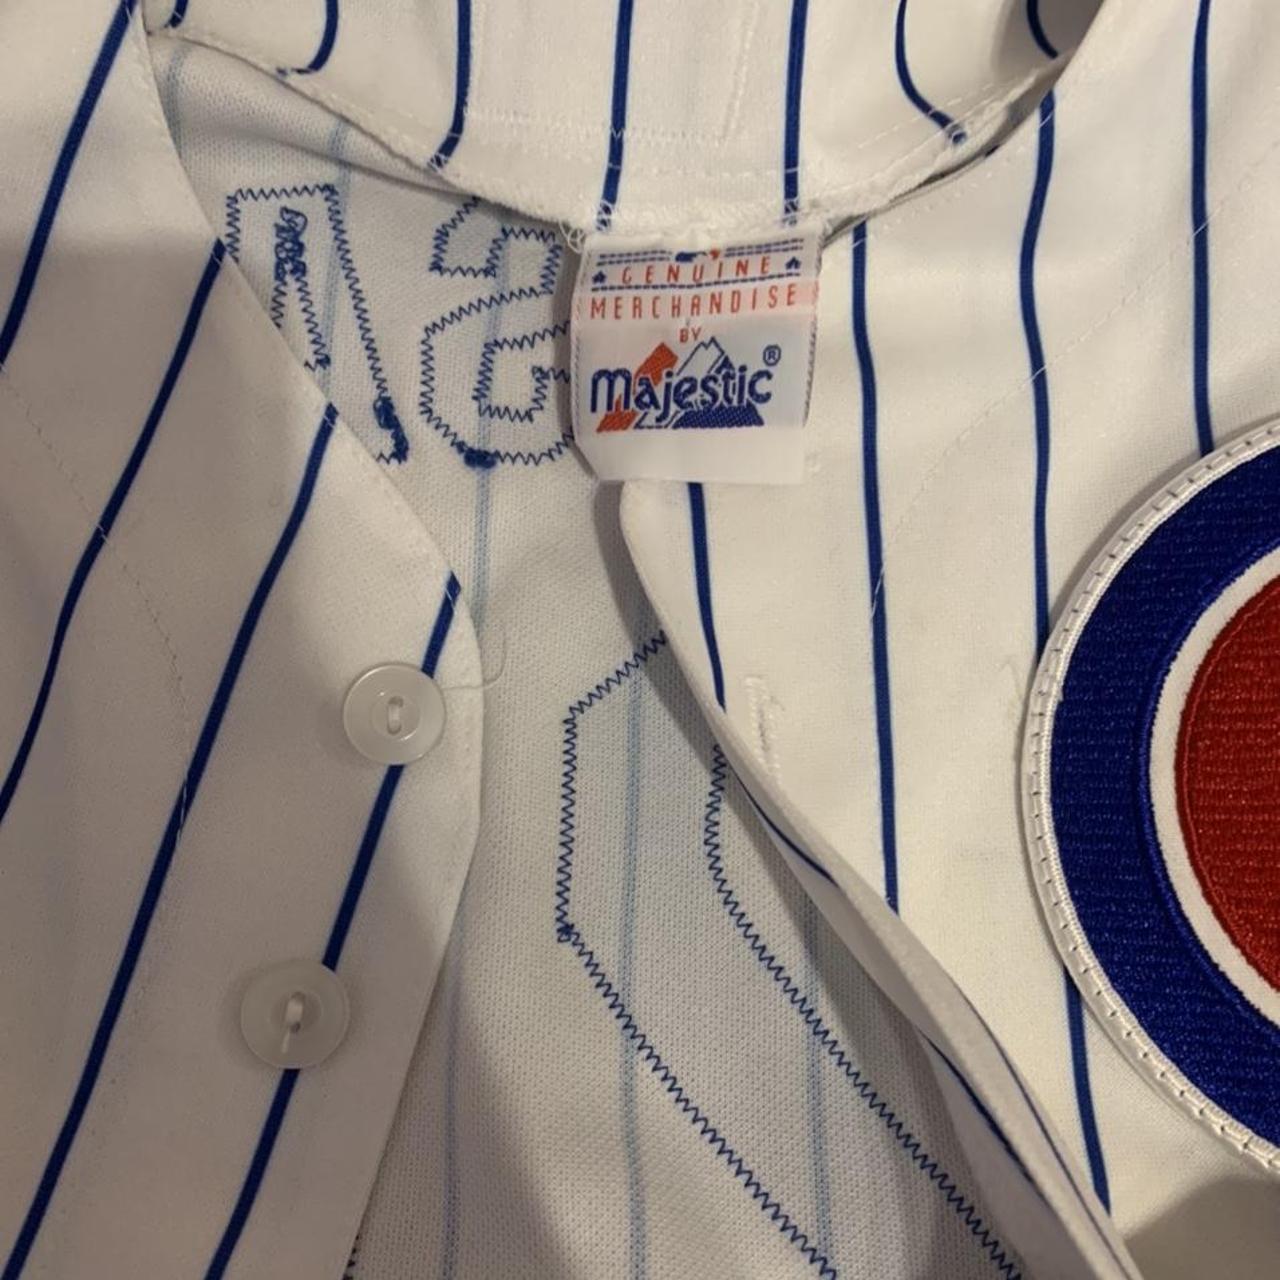 Cubs #21 Sammy Sosa jersey from Majestic Athletic. - Depop